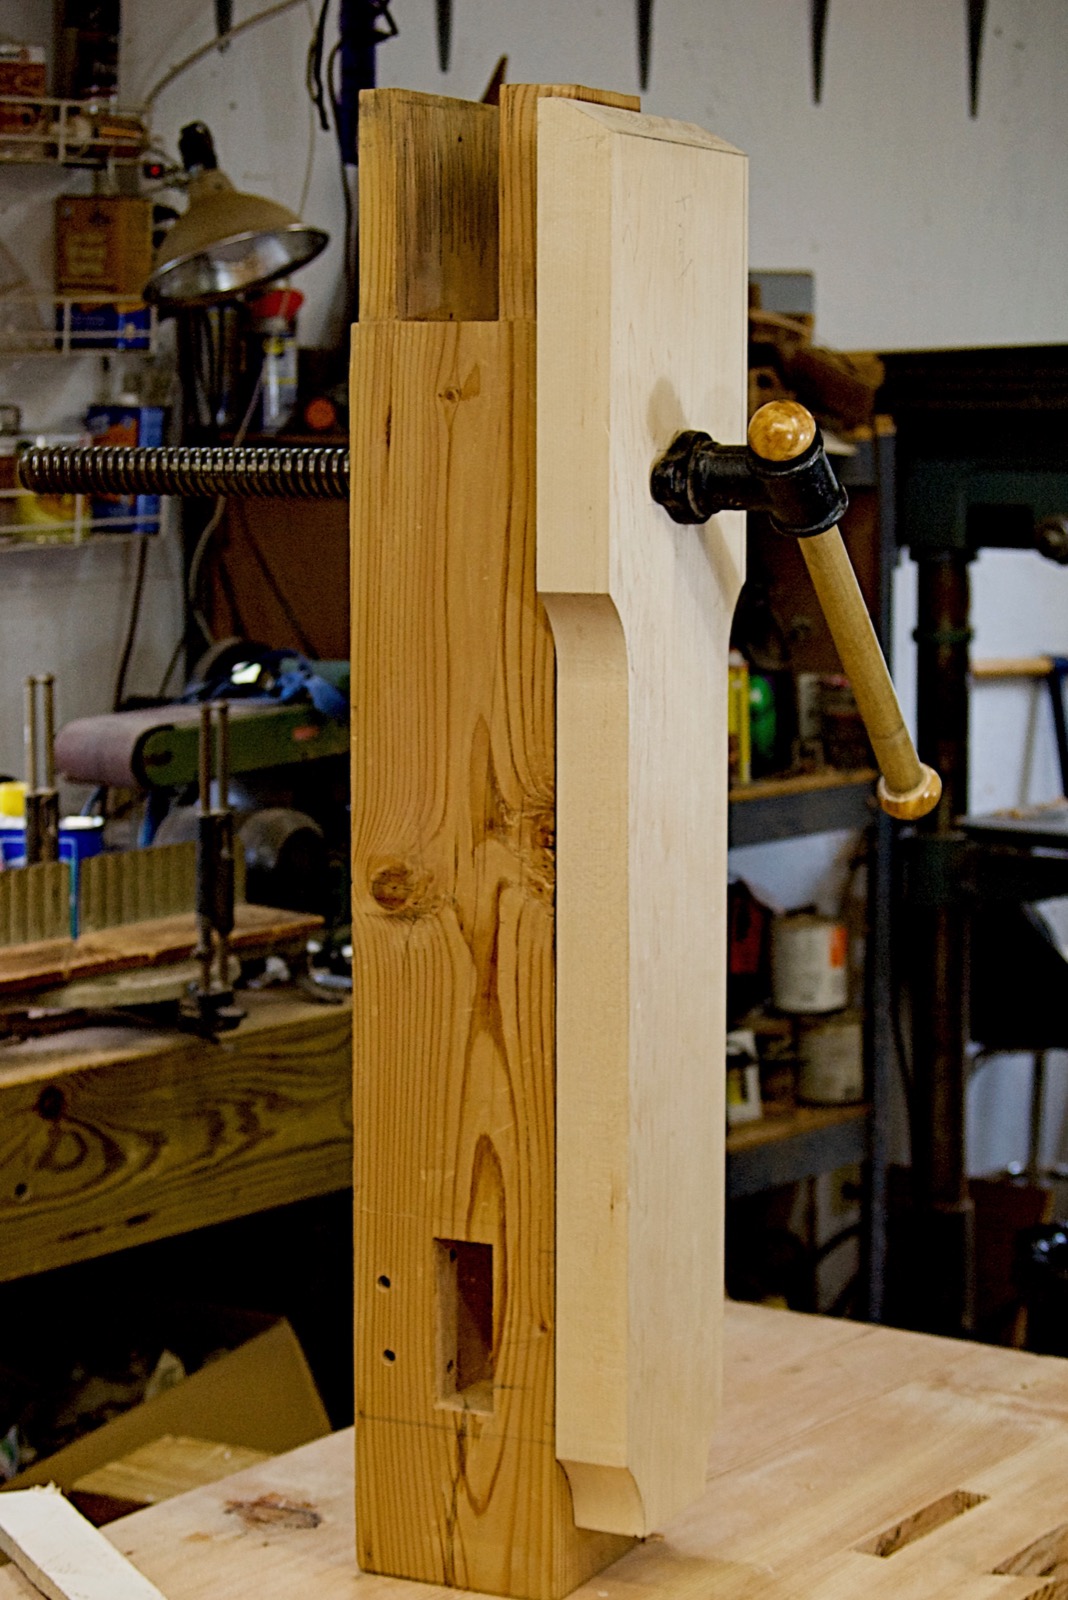 The leg vise and a bench leg.